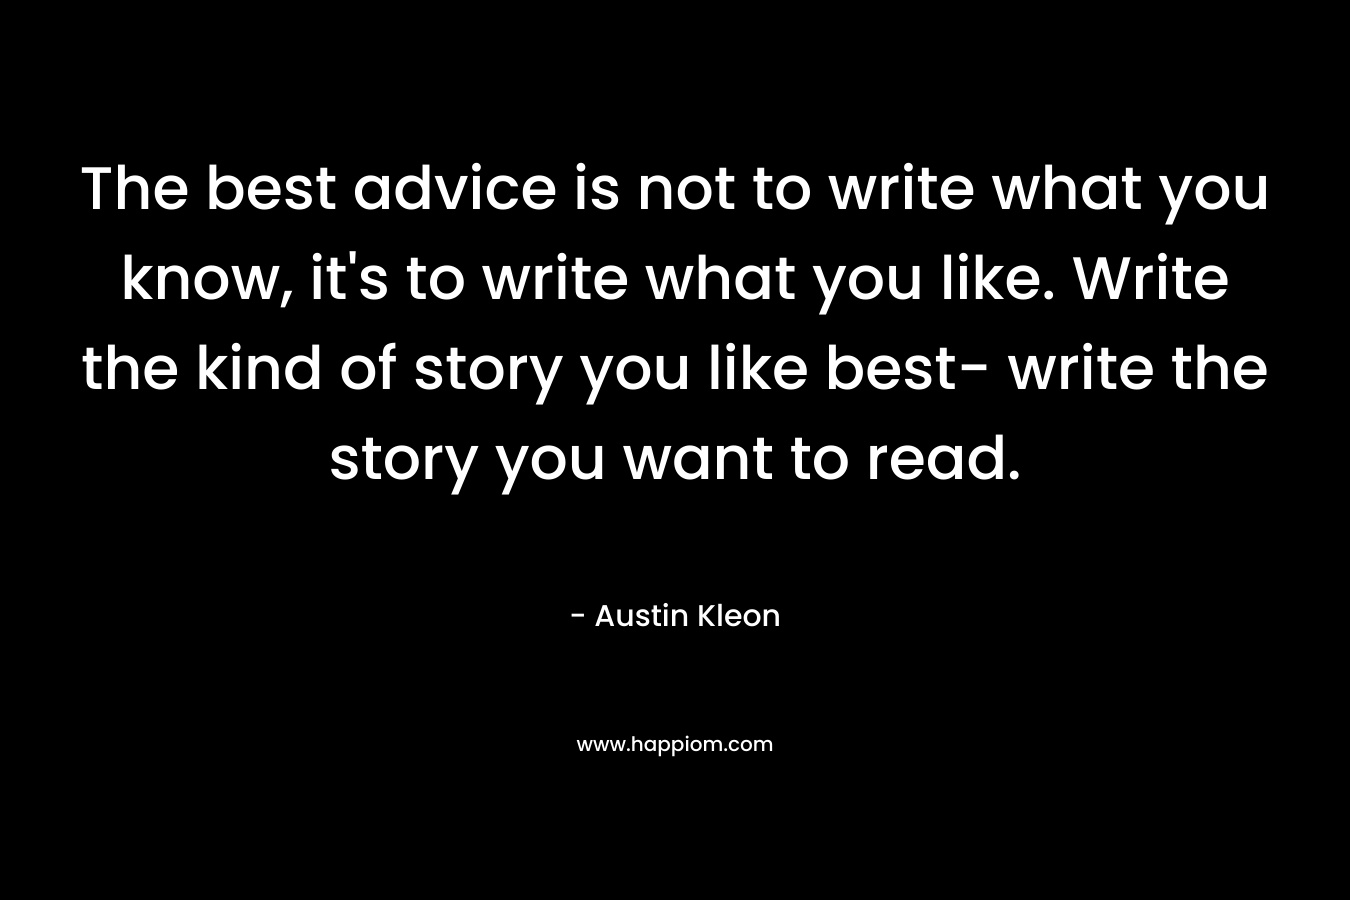 The best advice is not to write what you know, it's to write what you like. Write the kind of story you like best- write the story you want to read.